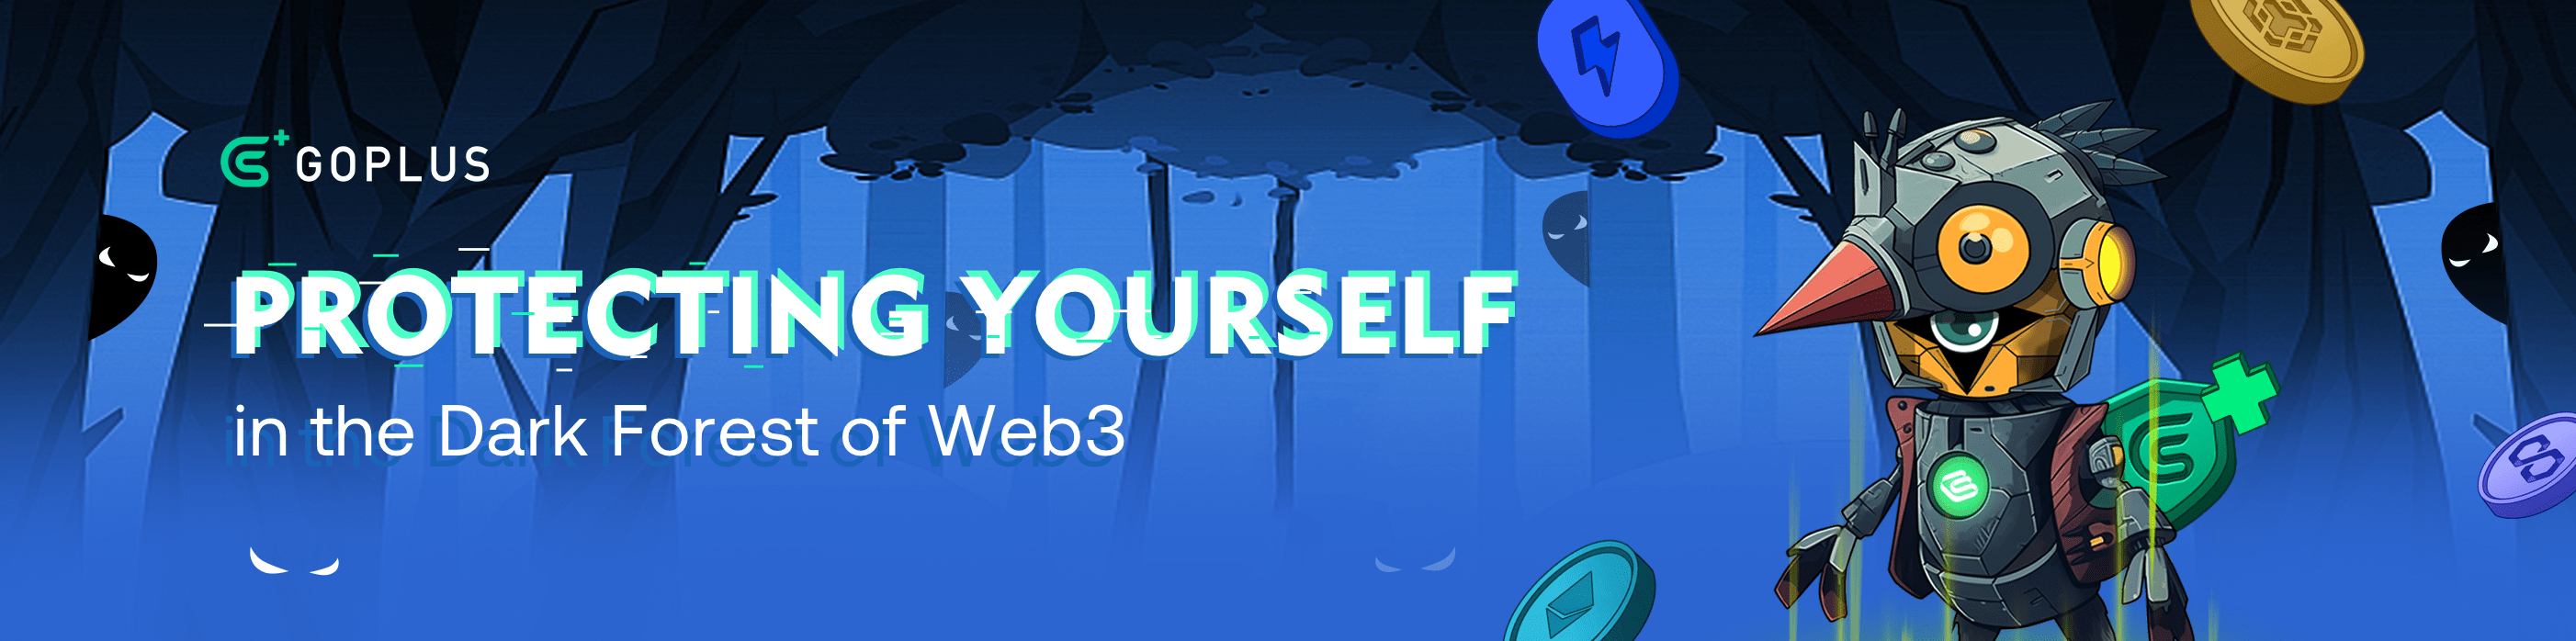 Protecting Yourself in the Dark Forest of Web3